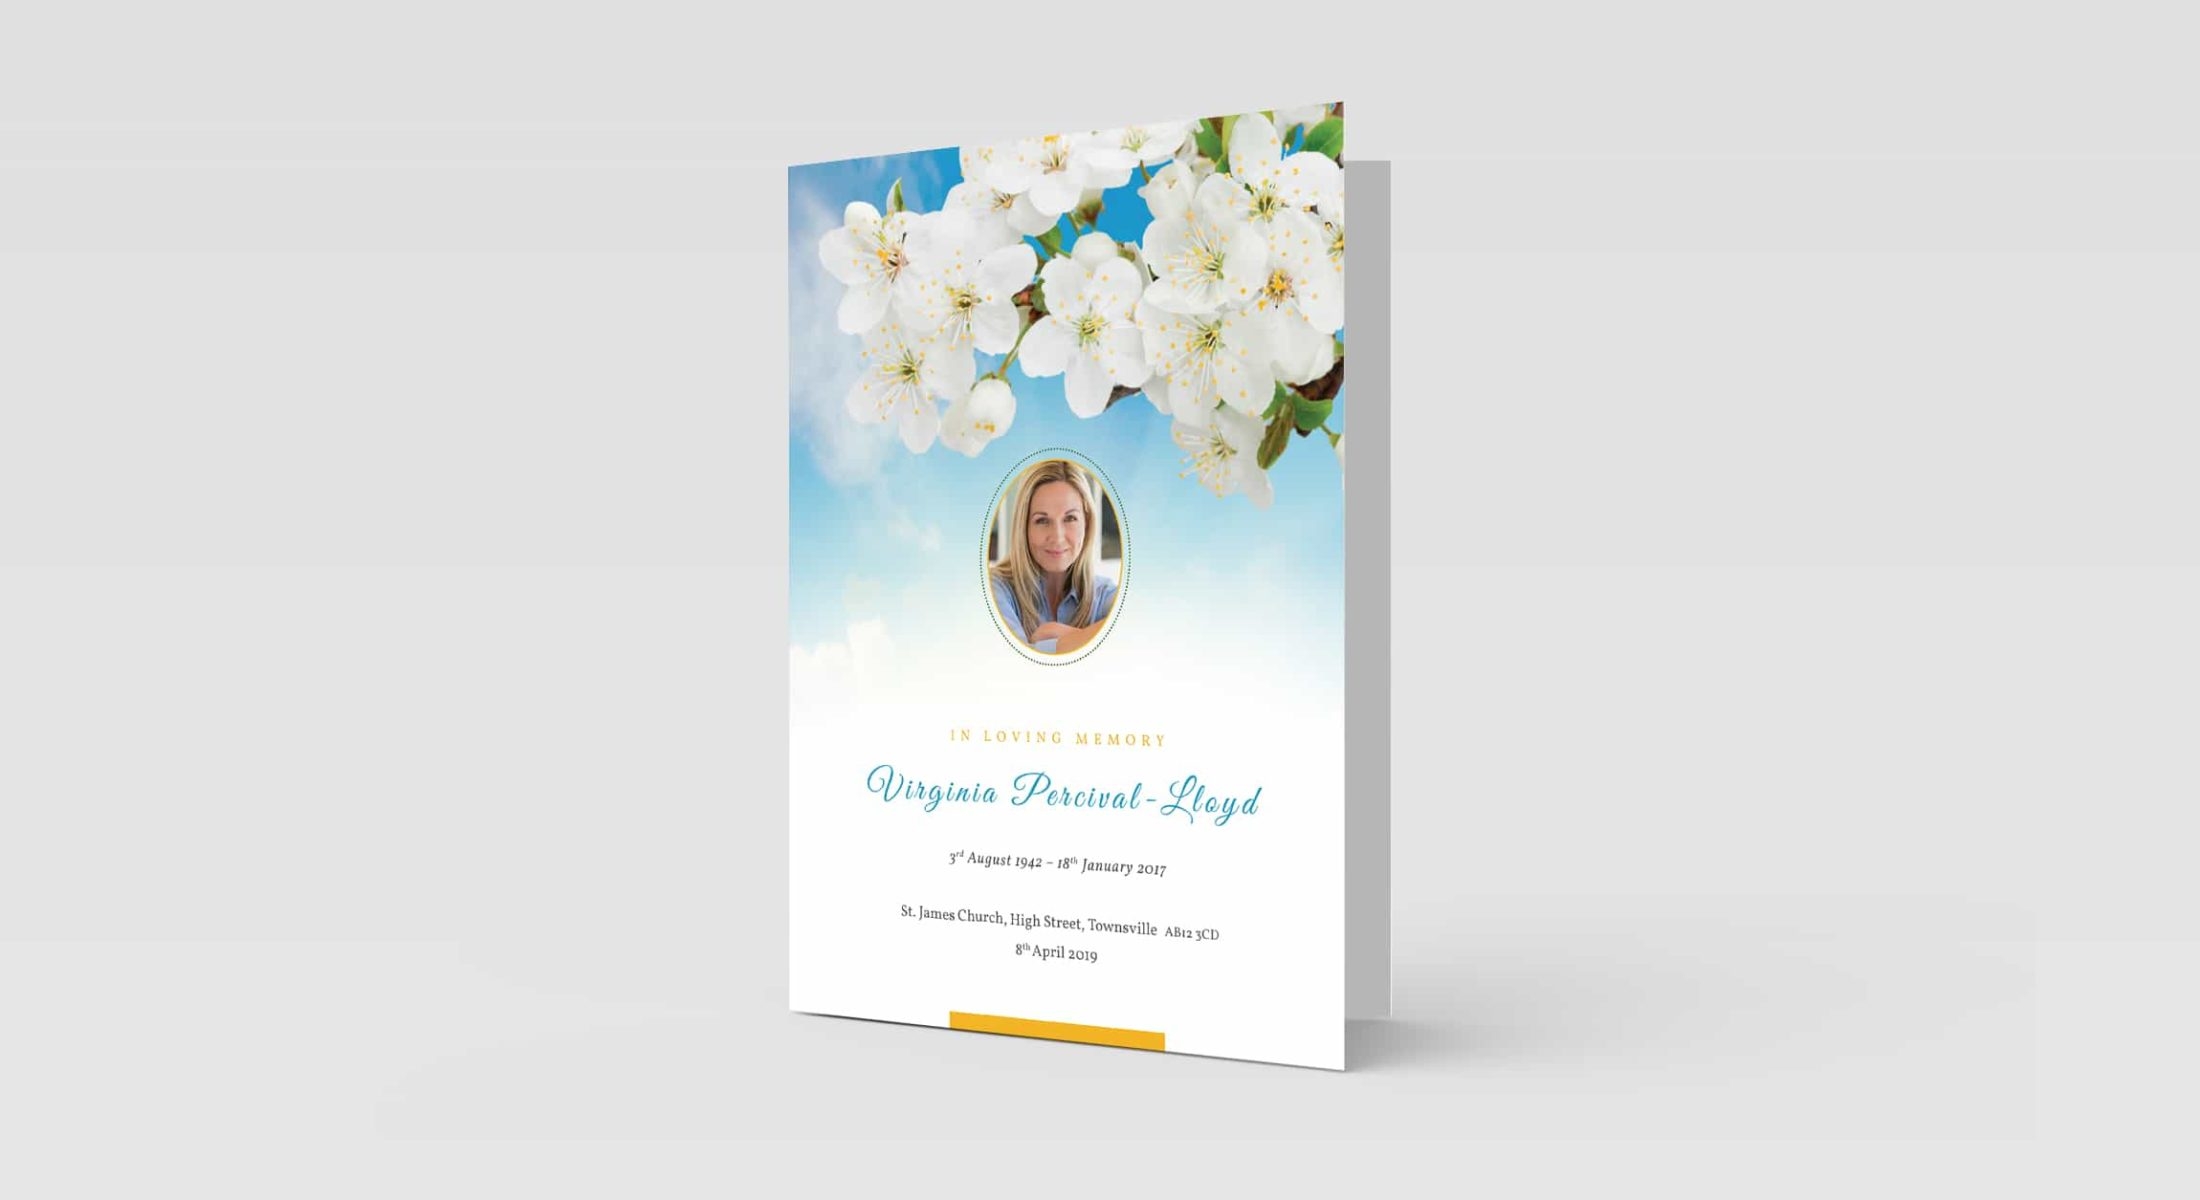 Funeral Order Of Service – Blue Sky & Flowers With Photo Personalised Design – High Quality Print – Heavy 300g Card – Qty (10x) – Memorial Booklet